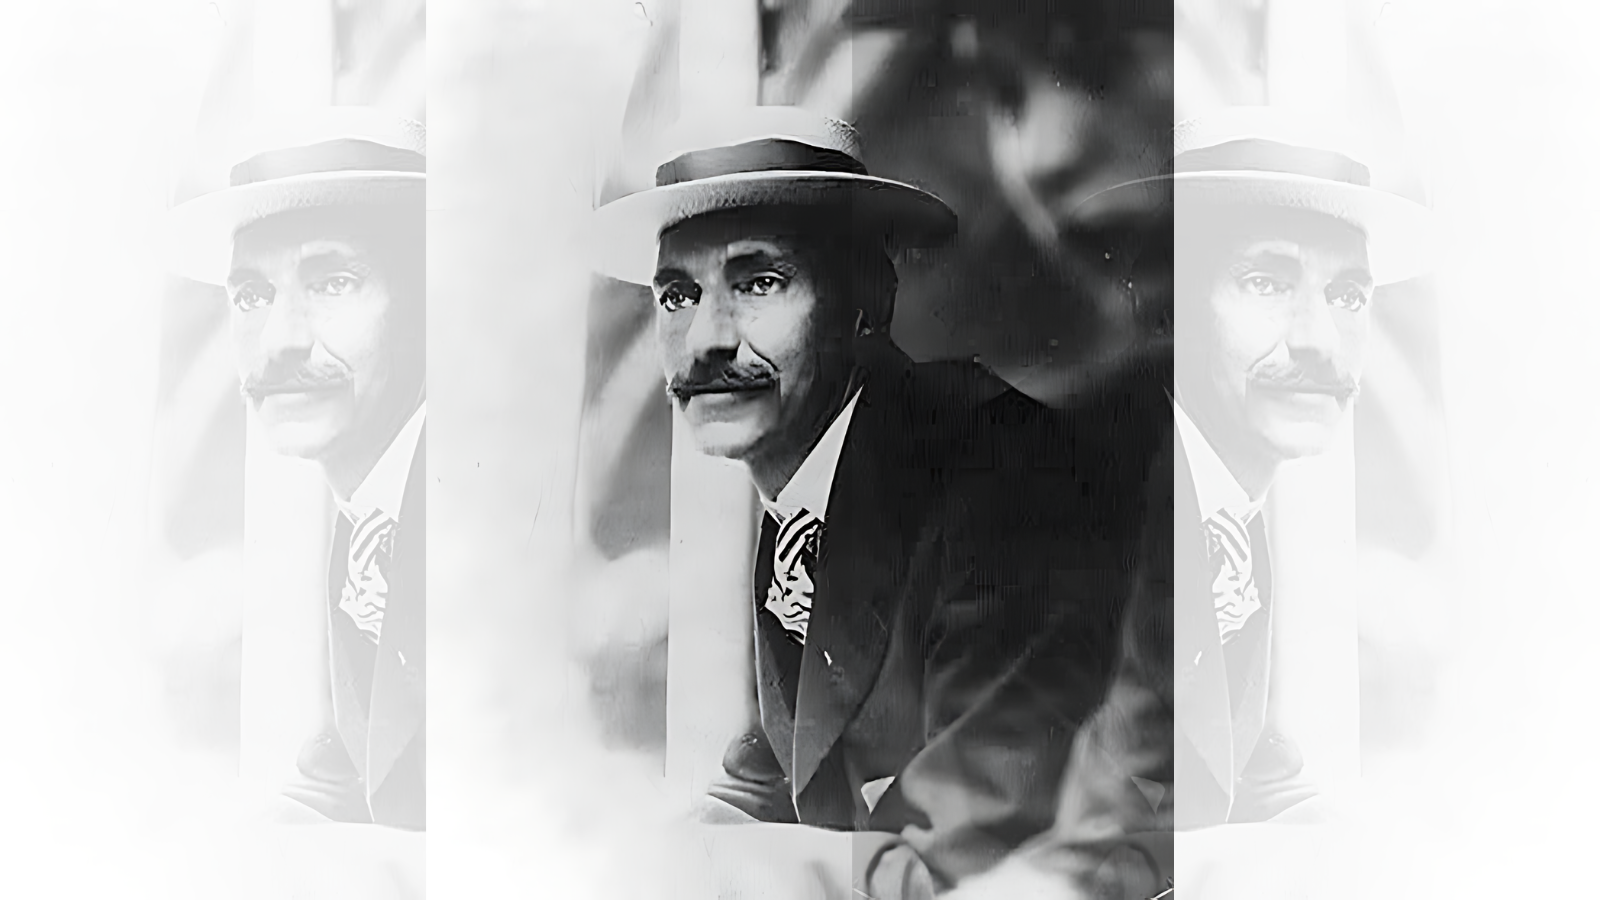 John Jacob Astor IV in 1909. He was the wealthiest person aboard Titanic; he did not survive.